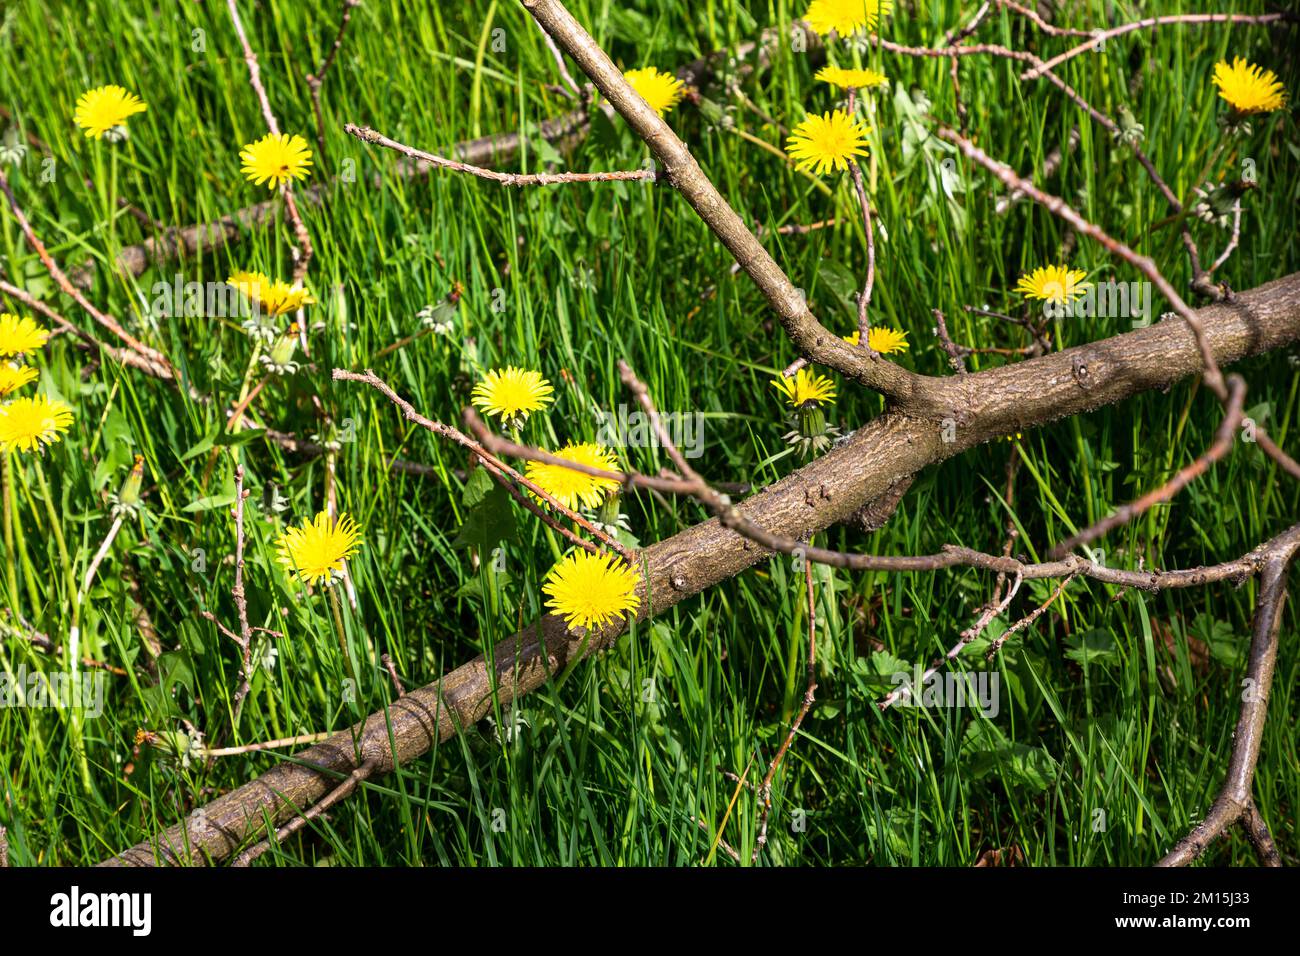 On a meadow lies a broken branch. Under it many plants of dandelion are blooming. The yellow flowers shine in the green grass. Stock Photo